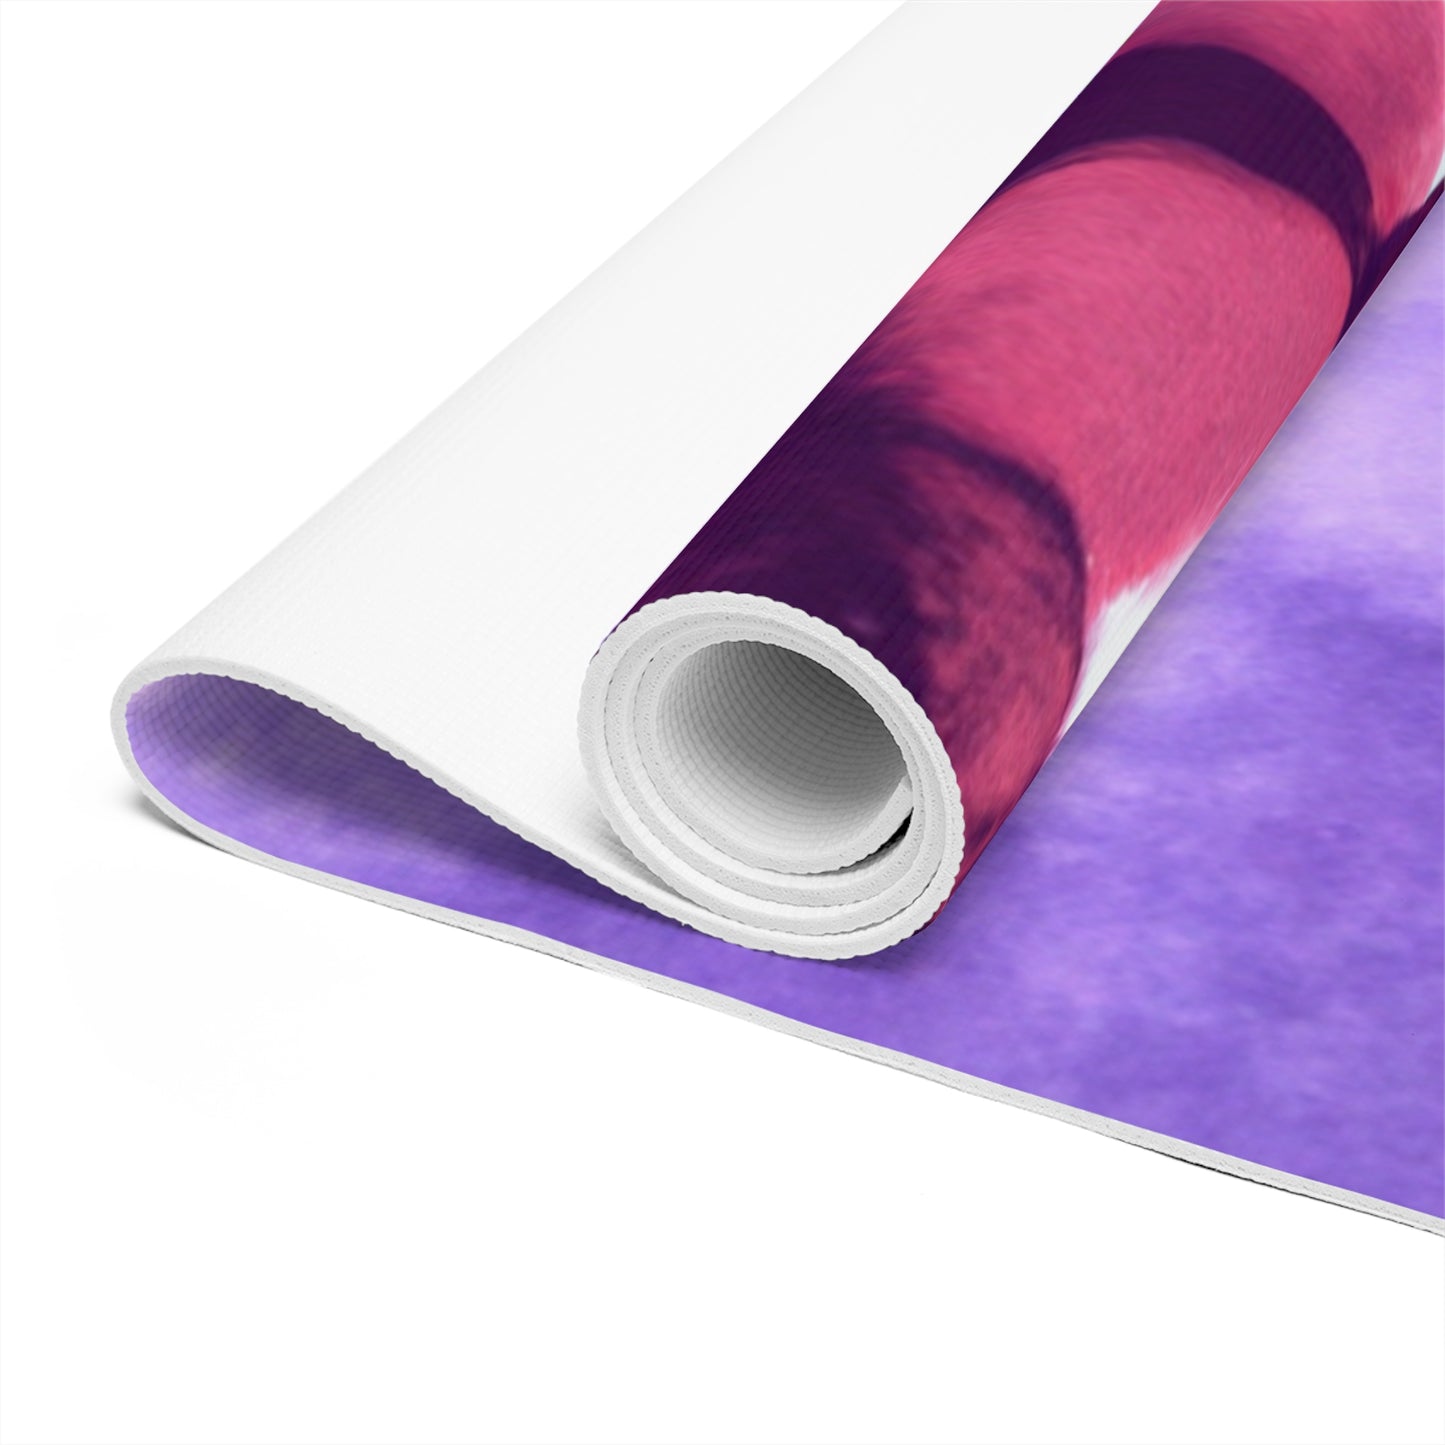 "Champion Force: A Tribute to Strength and Power" - Go Plus Foam Yoga Mat